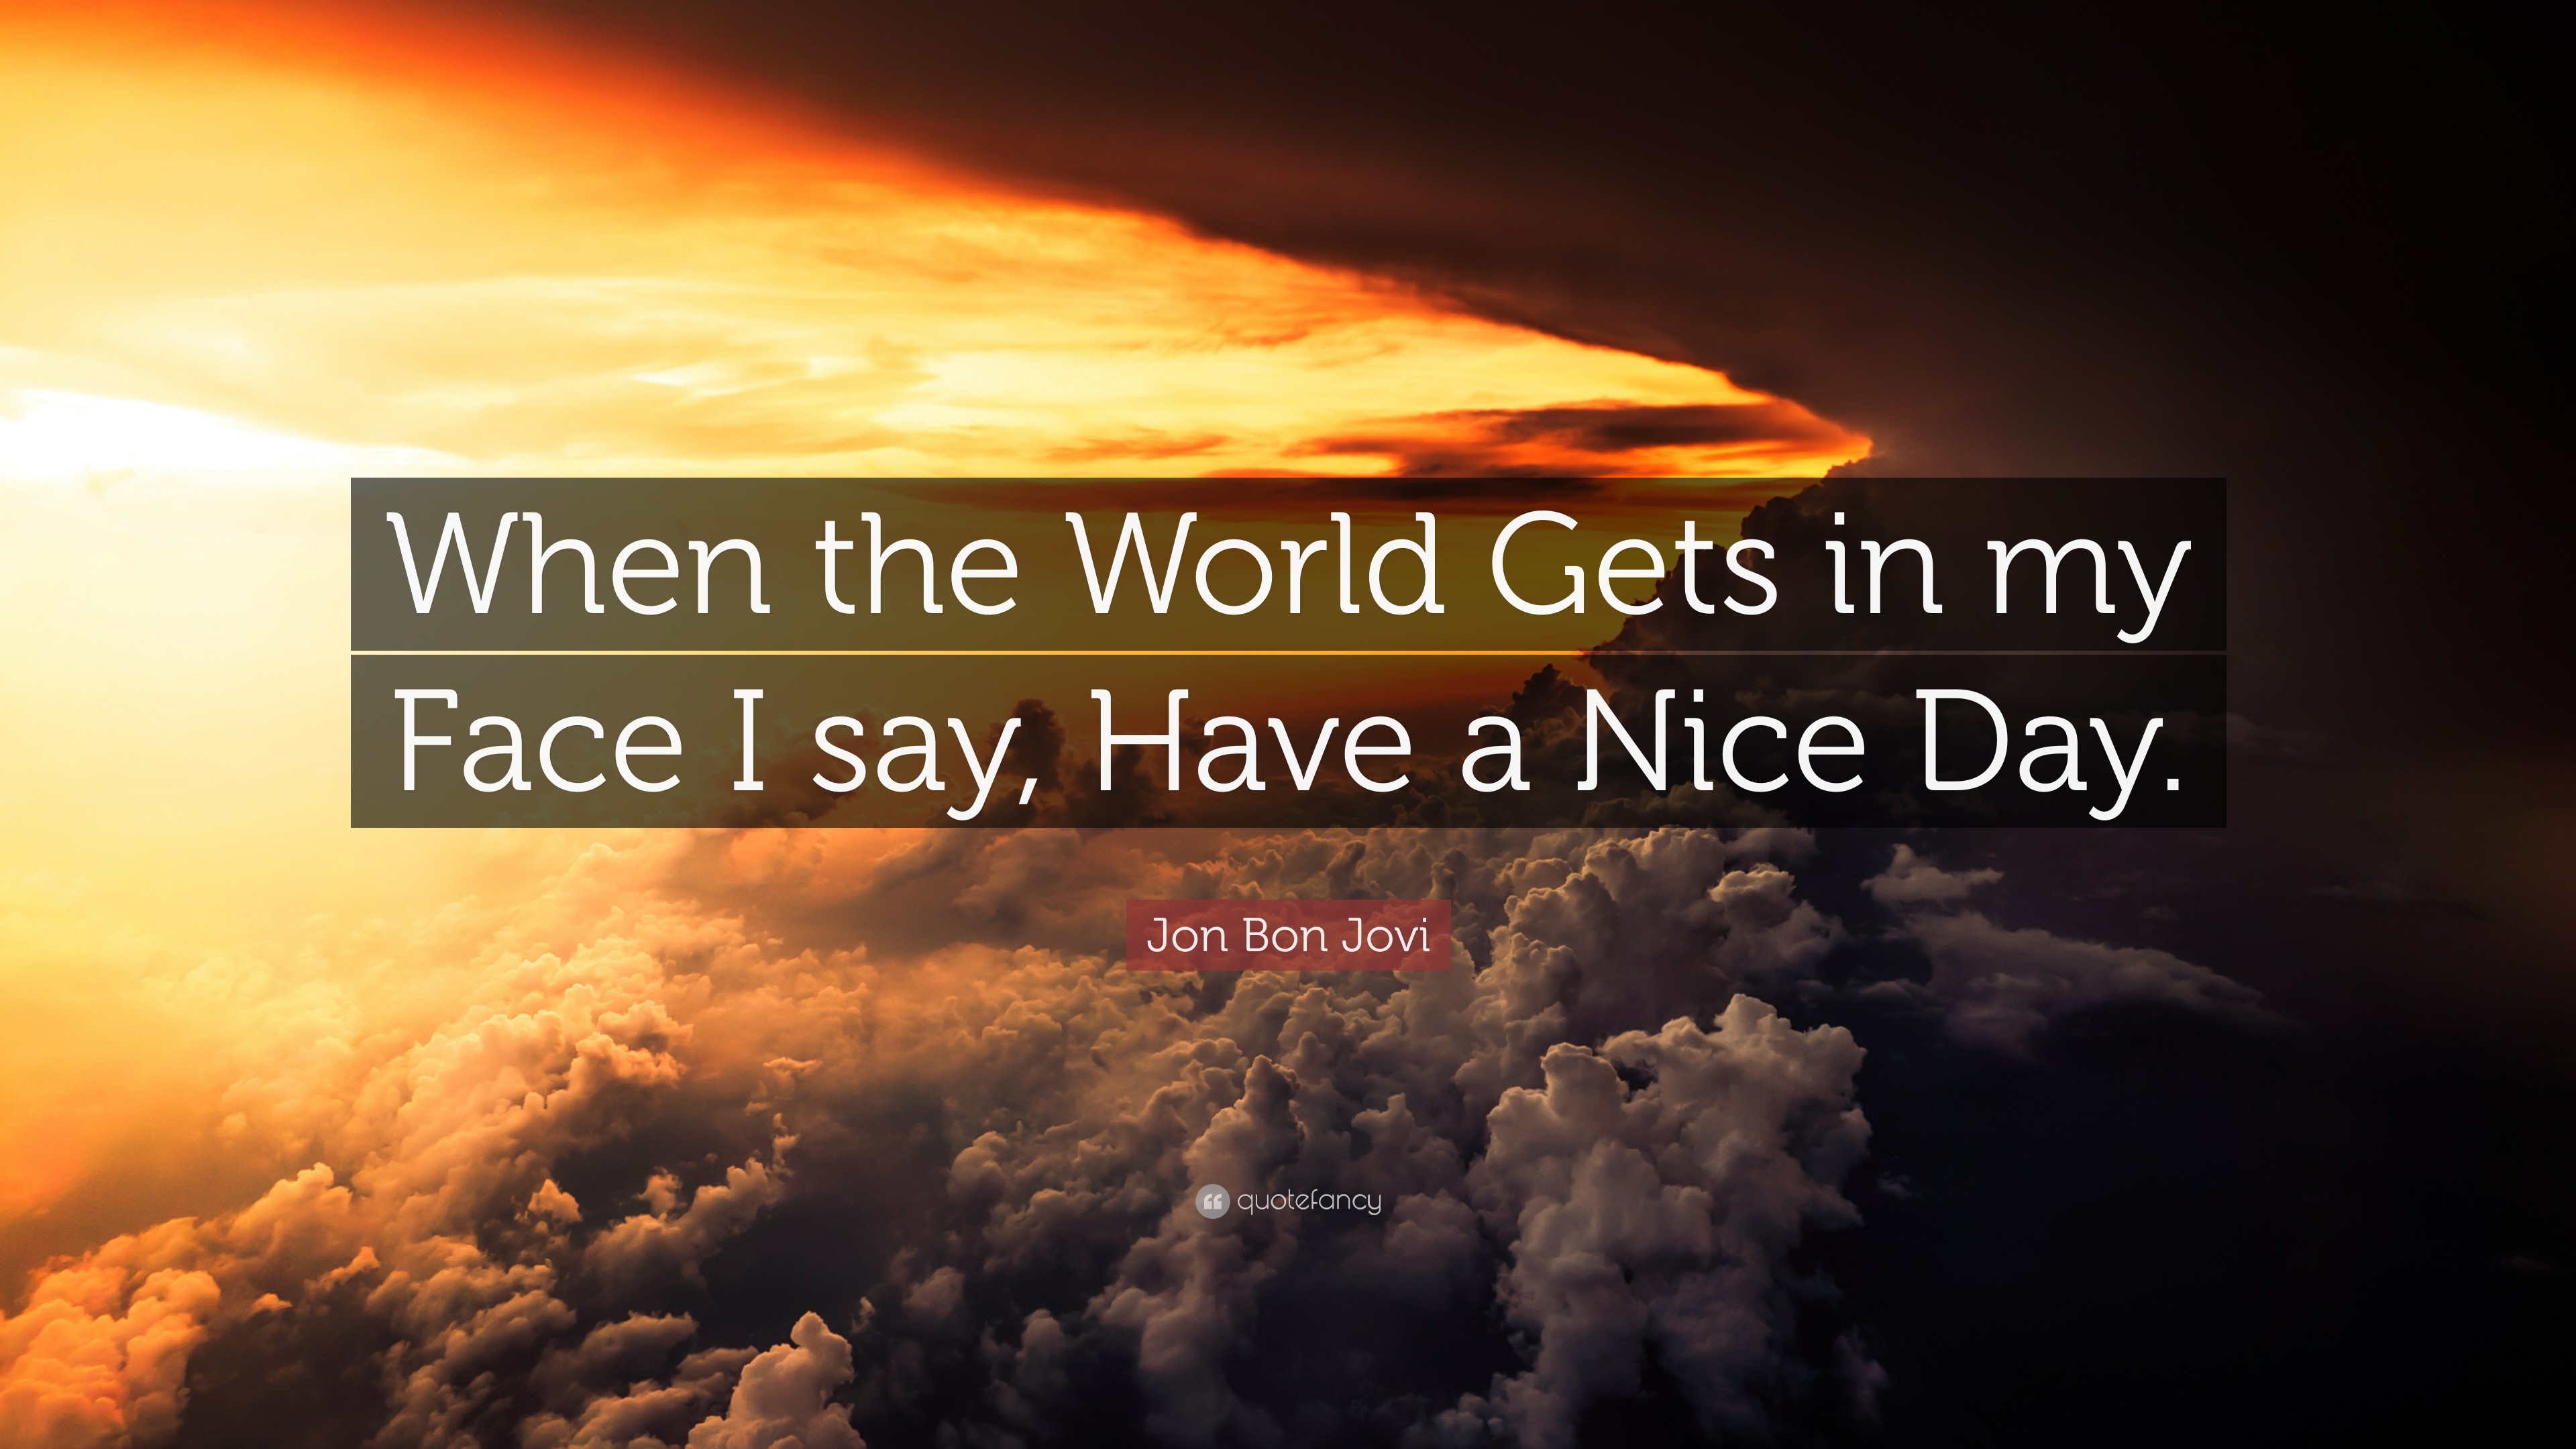 3840x2160 Jon Bon Jovi Quote: “When the World Gets in my Face I say,